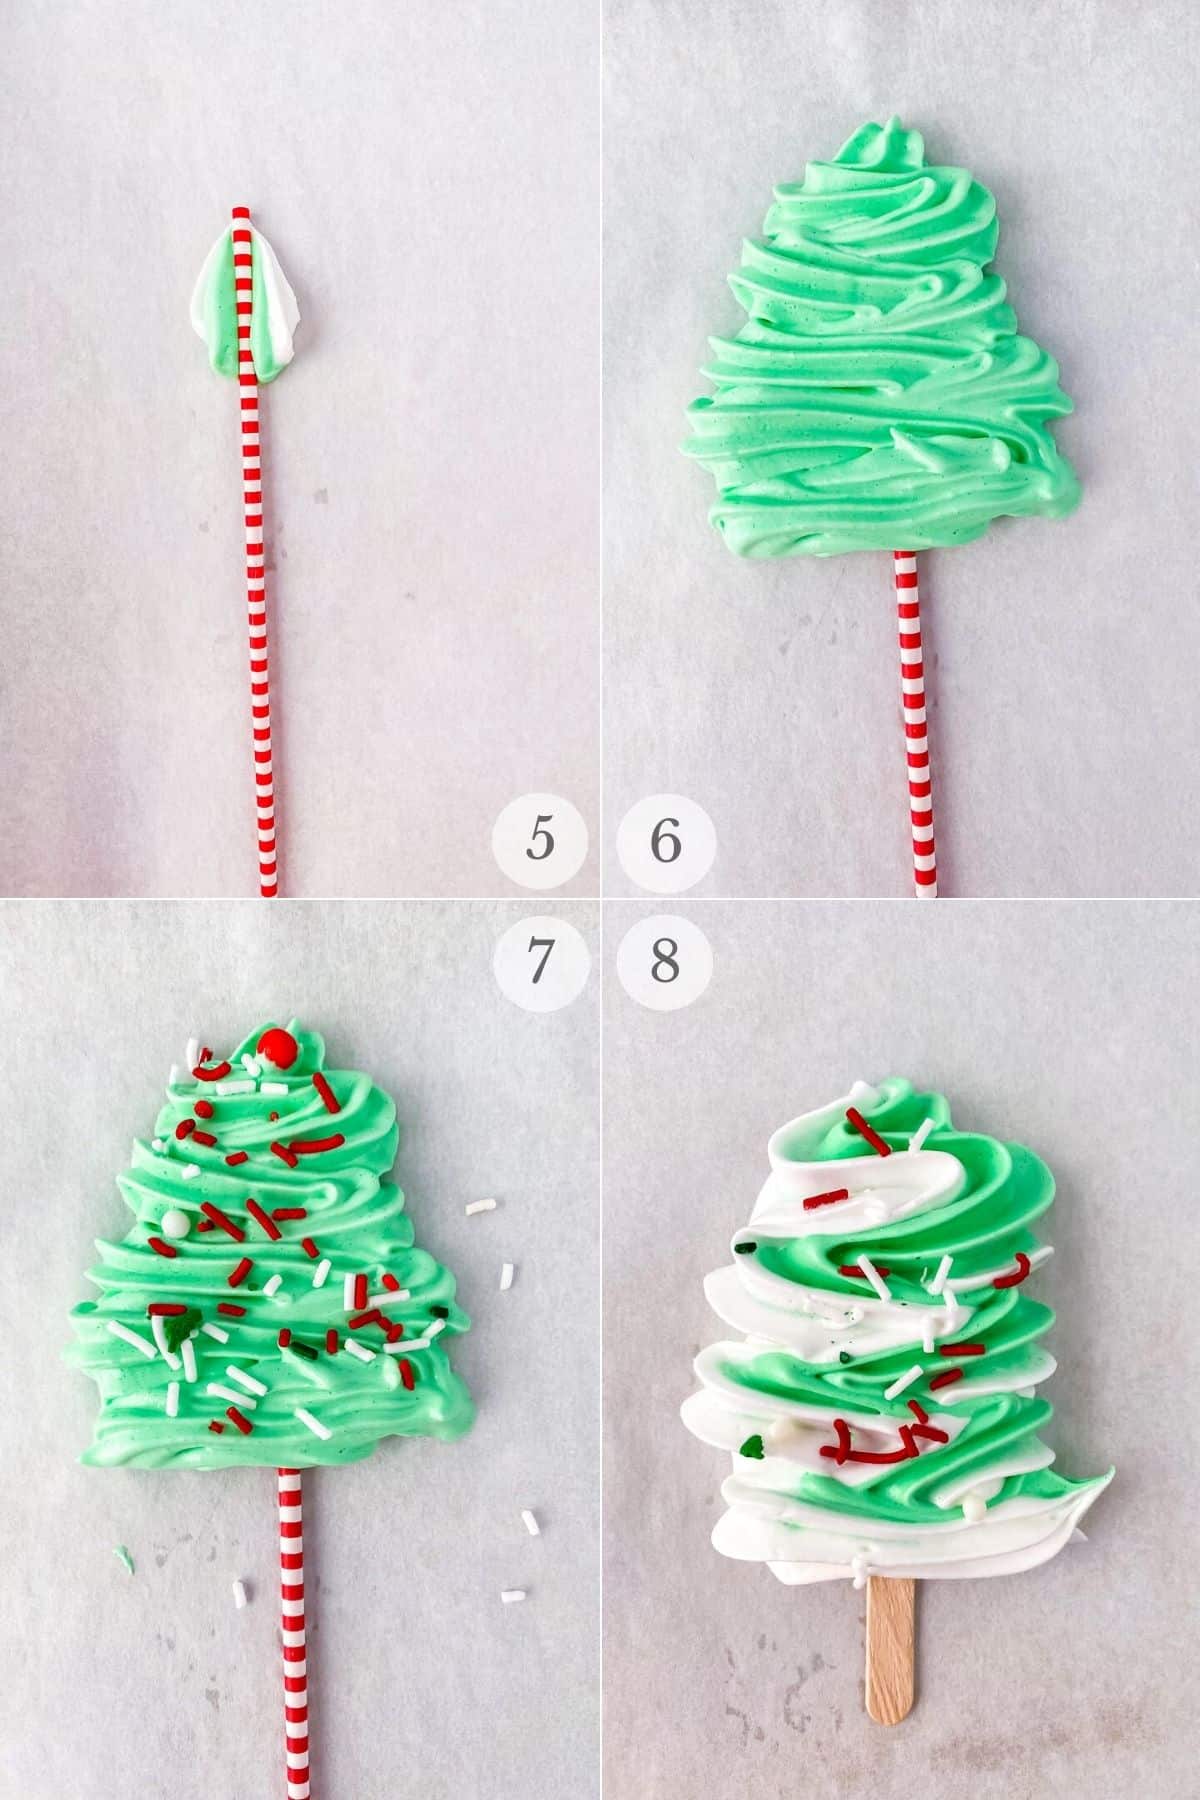 how to make meringues on a stick steps 5-8